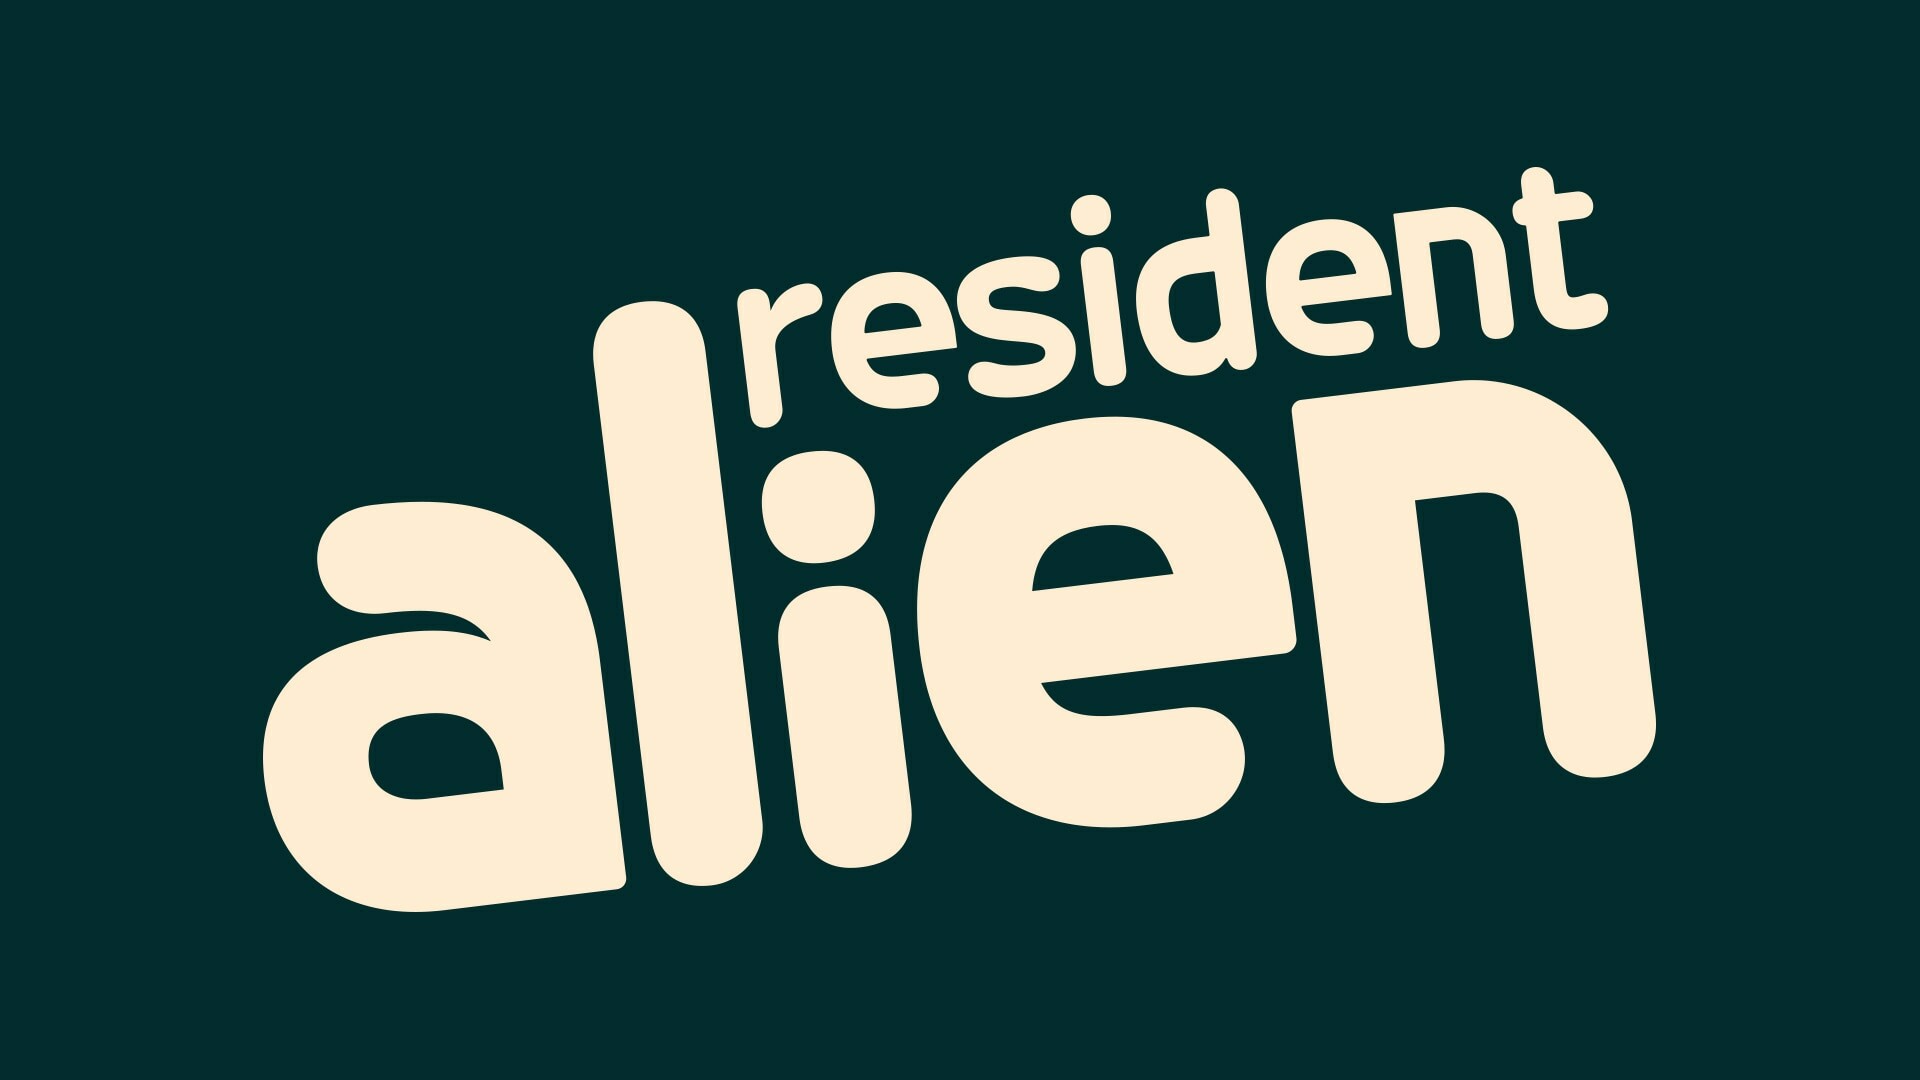 Resident Alien: TV series, Based on the comic book by Peter Hogan and Steve Parkhouse. 1920x1080 Full HD Background.